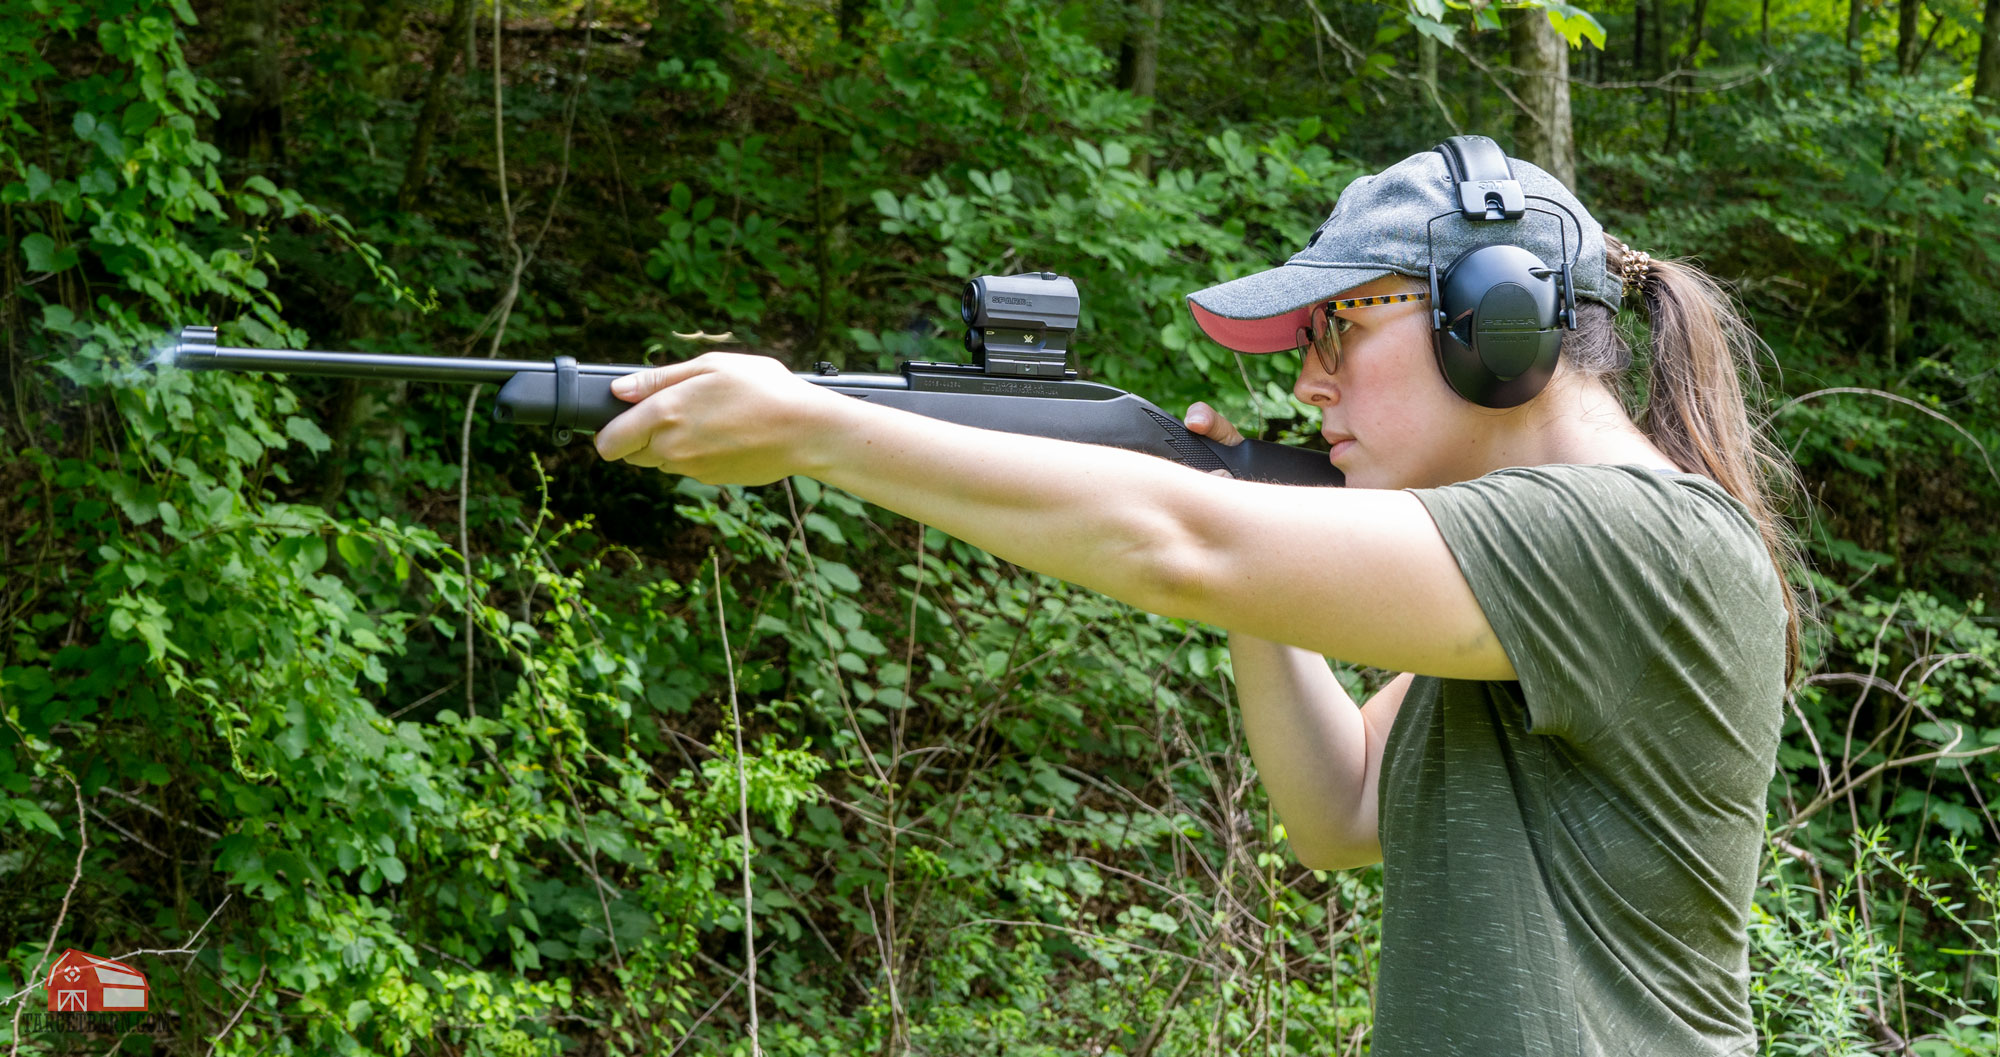 a light rifle like the ruger 10/22 is the best choice for using 22lr for self defense